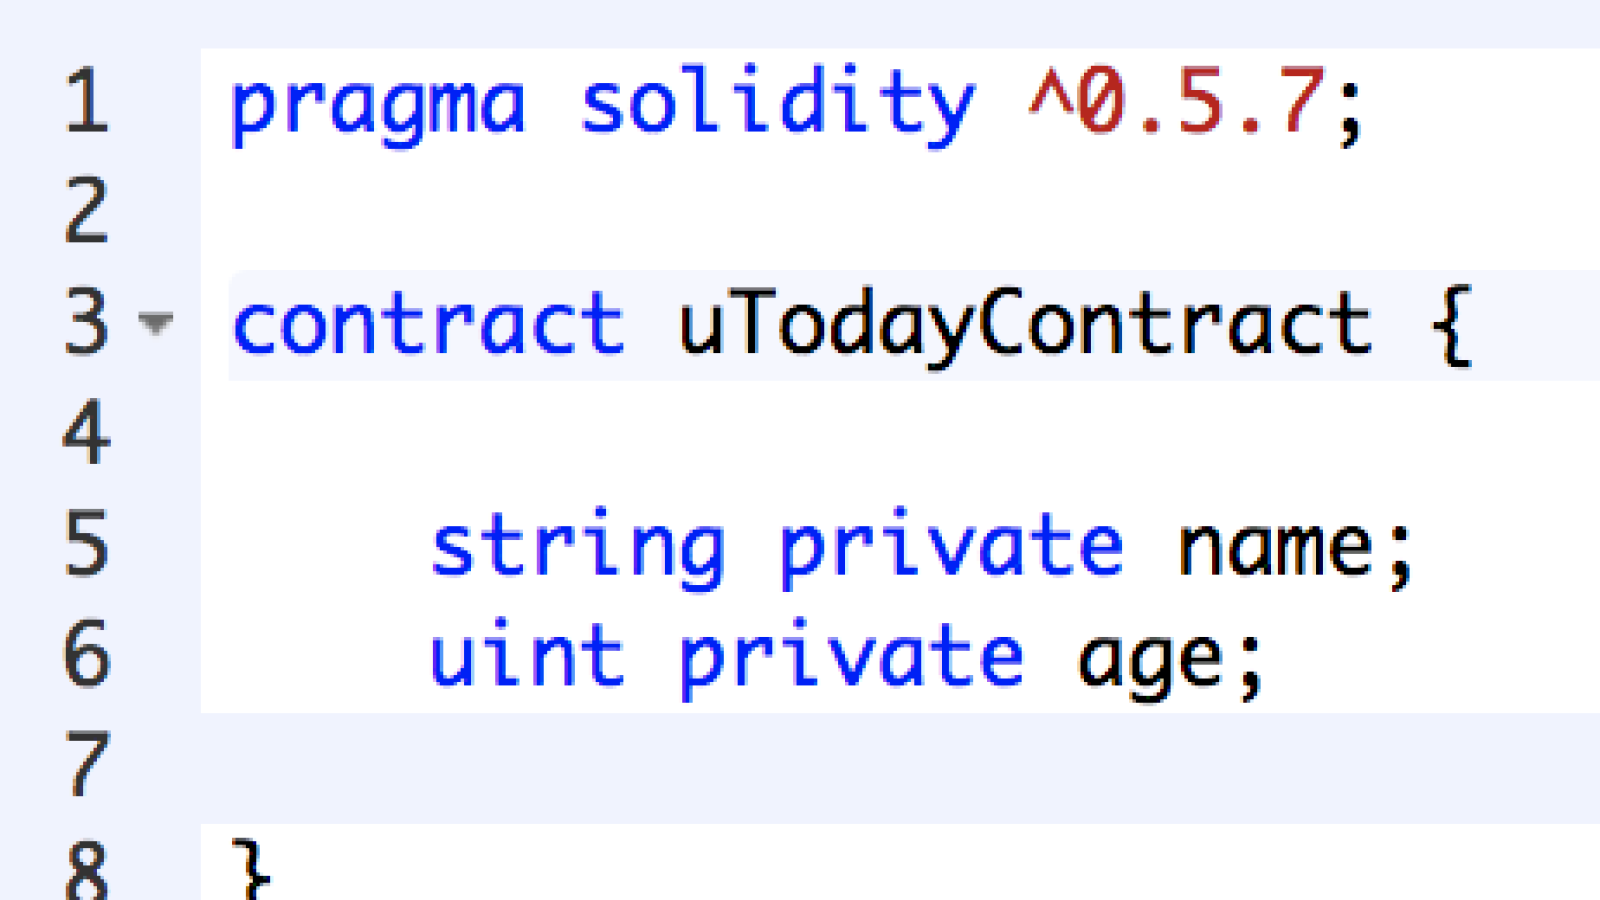 A private string and an integer